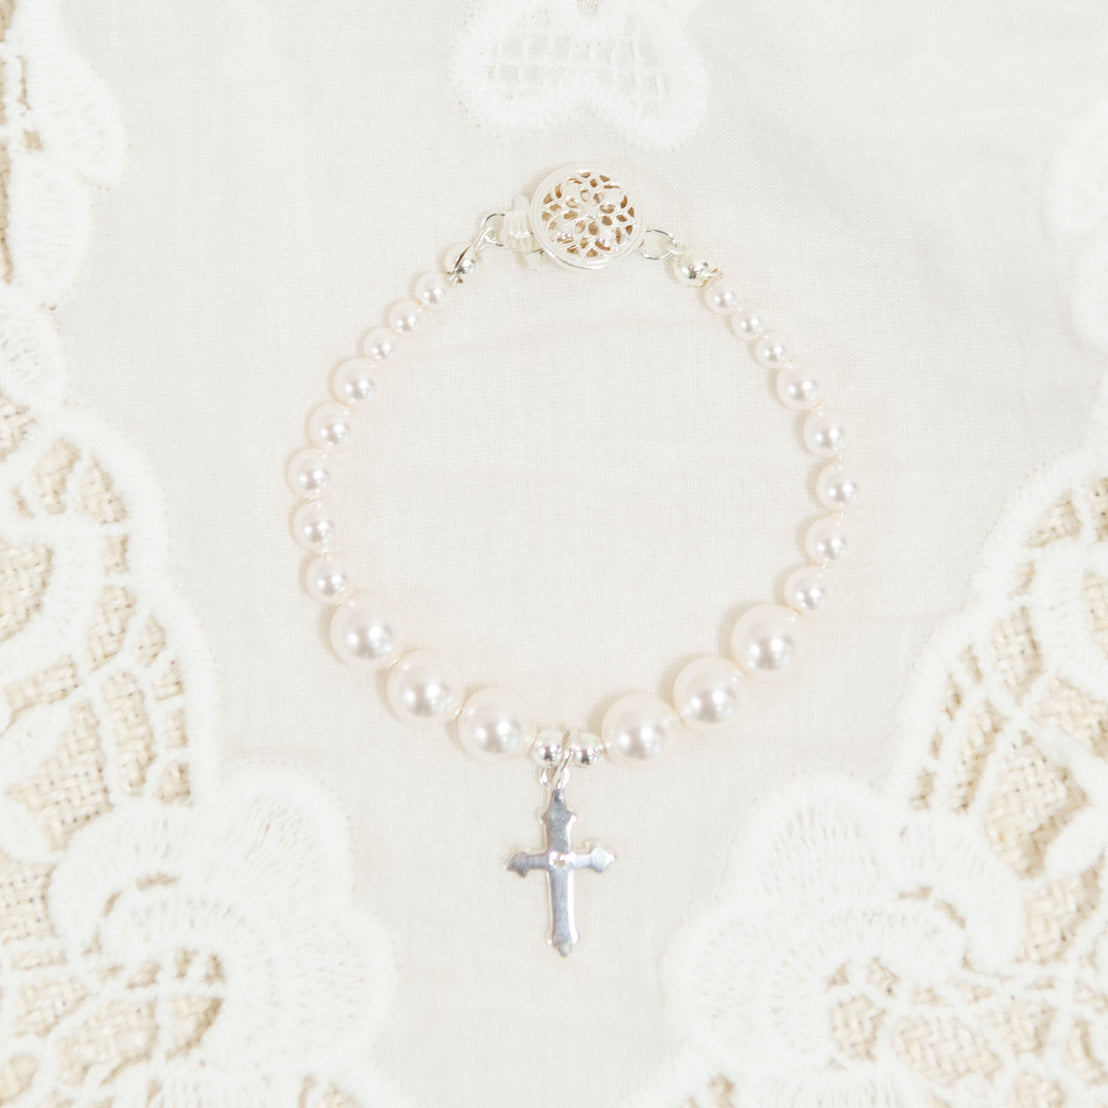 White Luster Pearl Bracelet with Silver Cross